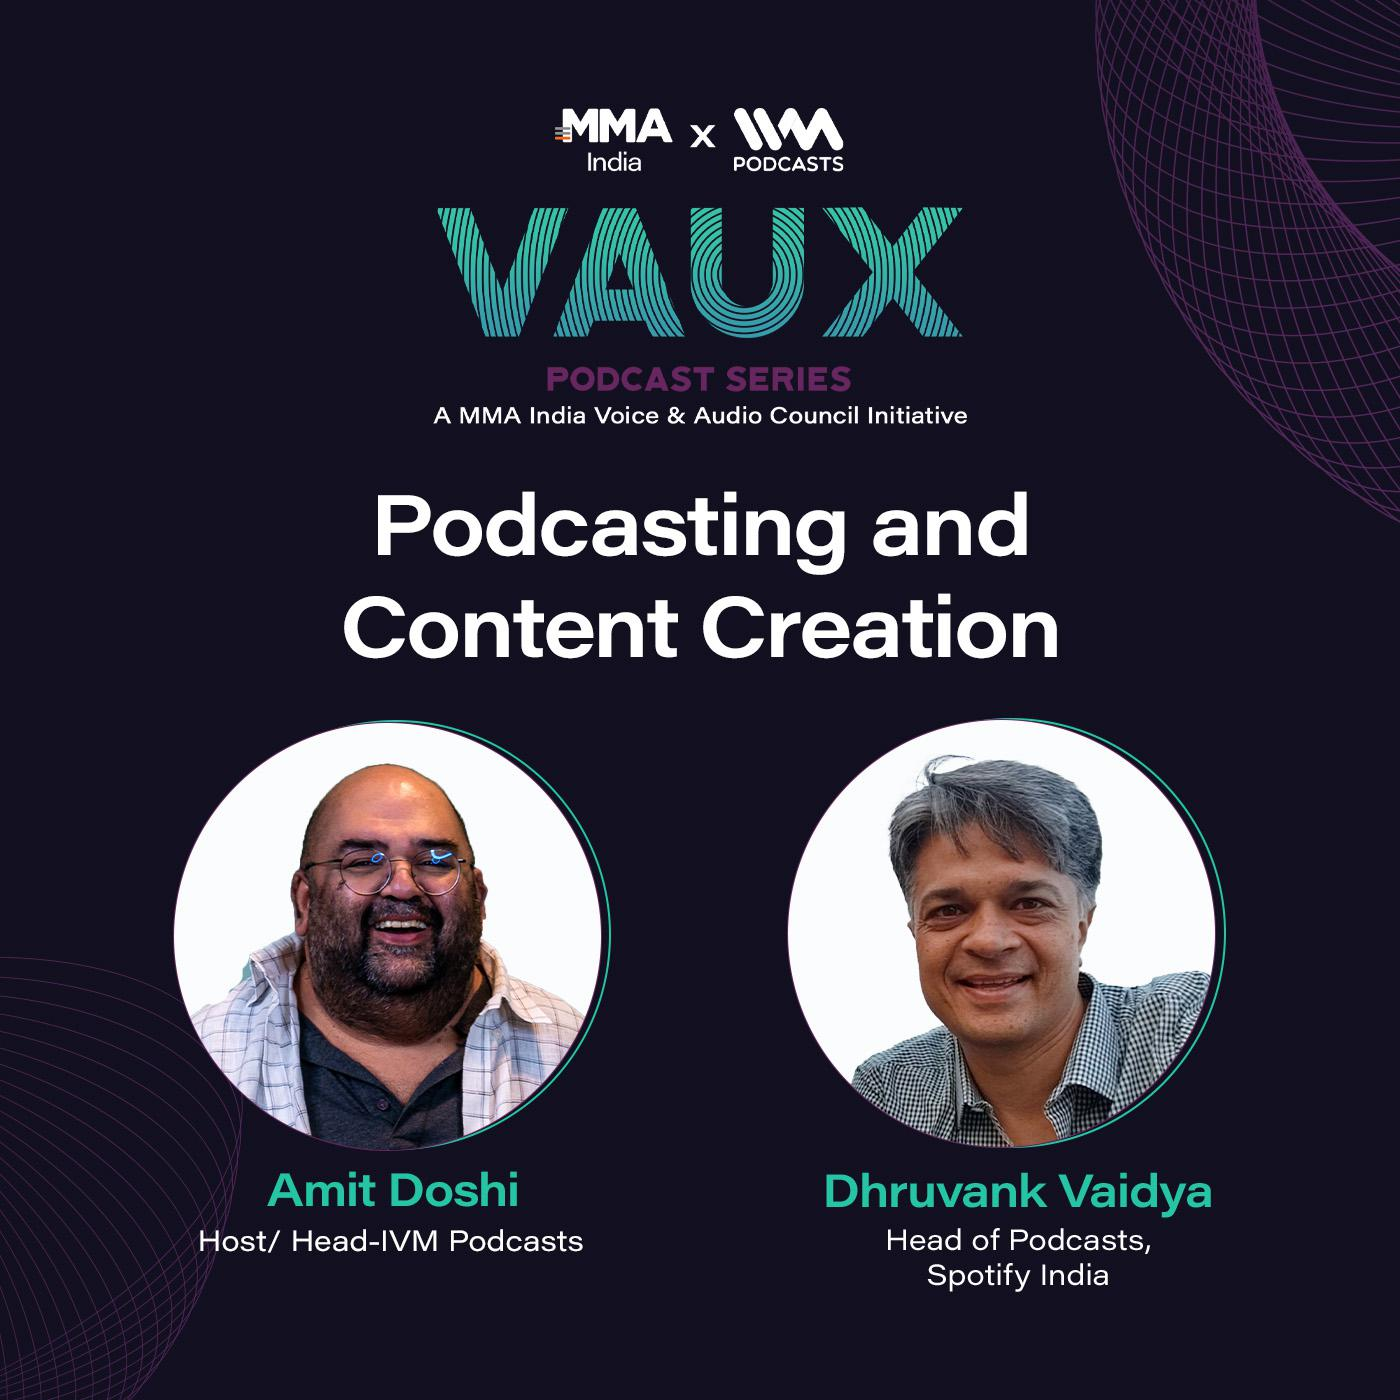 Podcasting and Content Creation